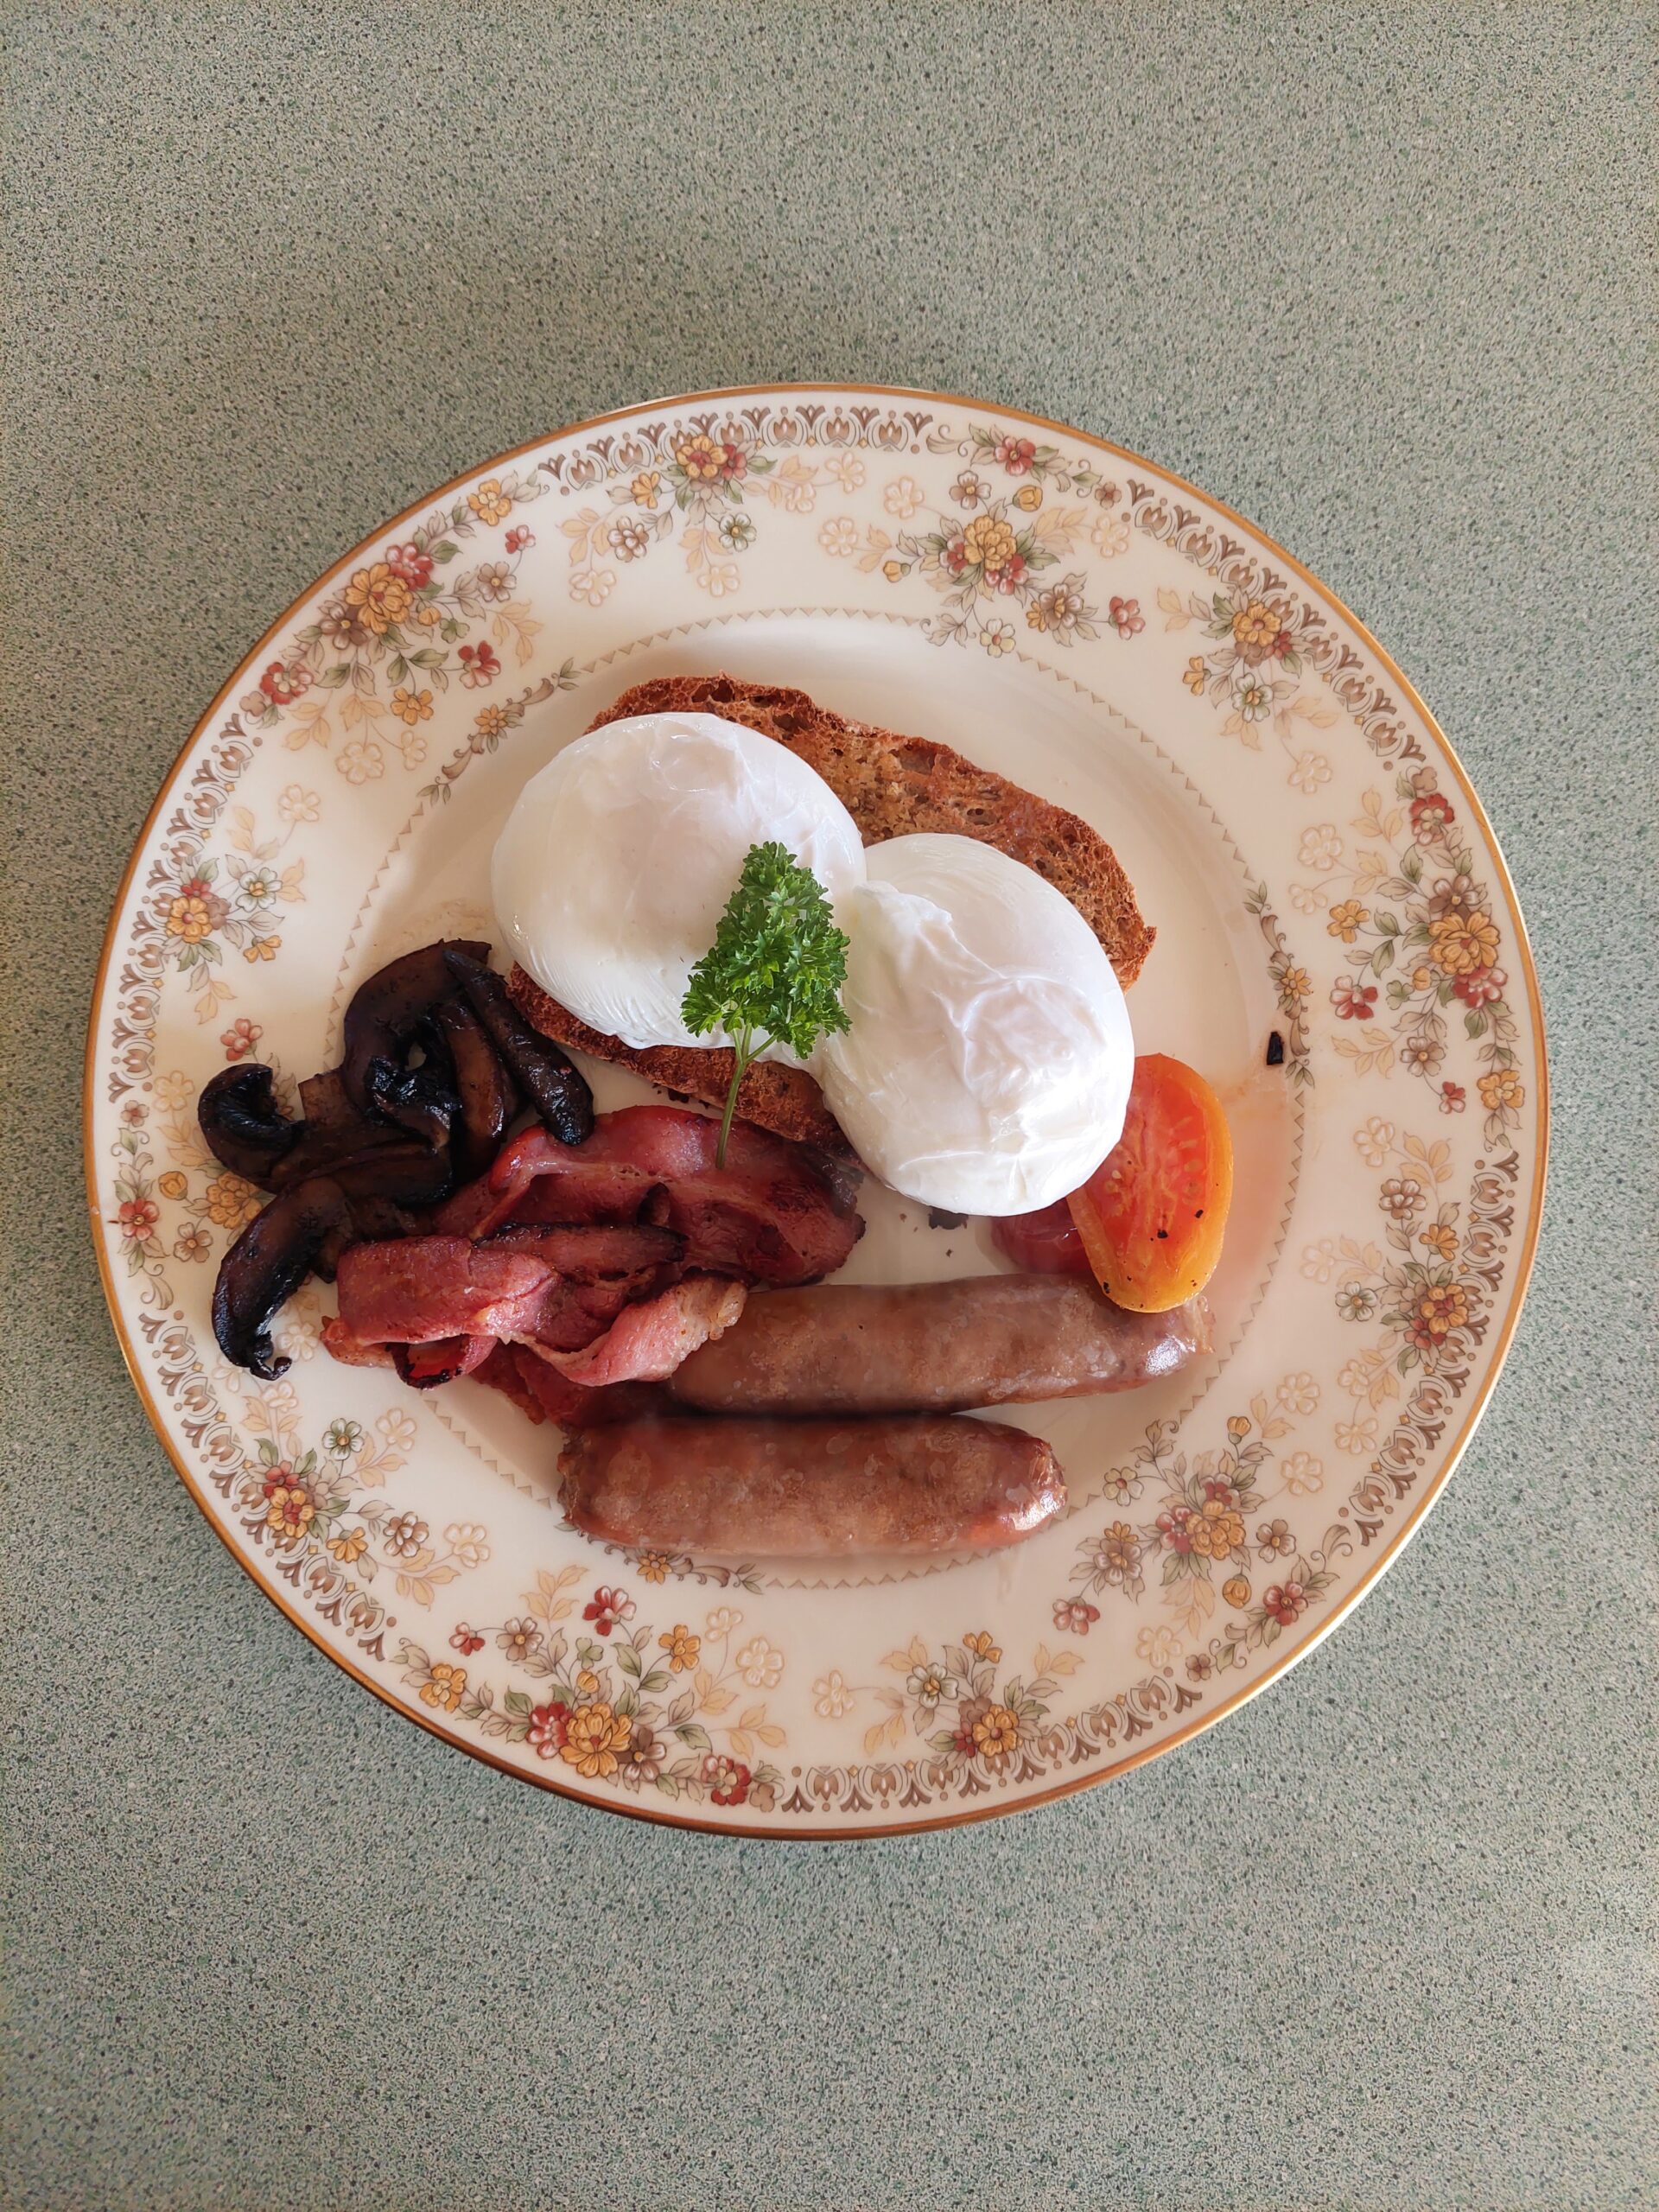 A cooked breakfast from the Awatuna Sunset Lodge dining menu